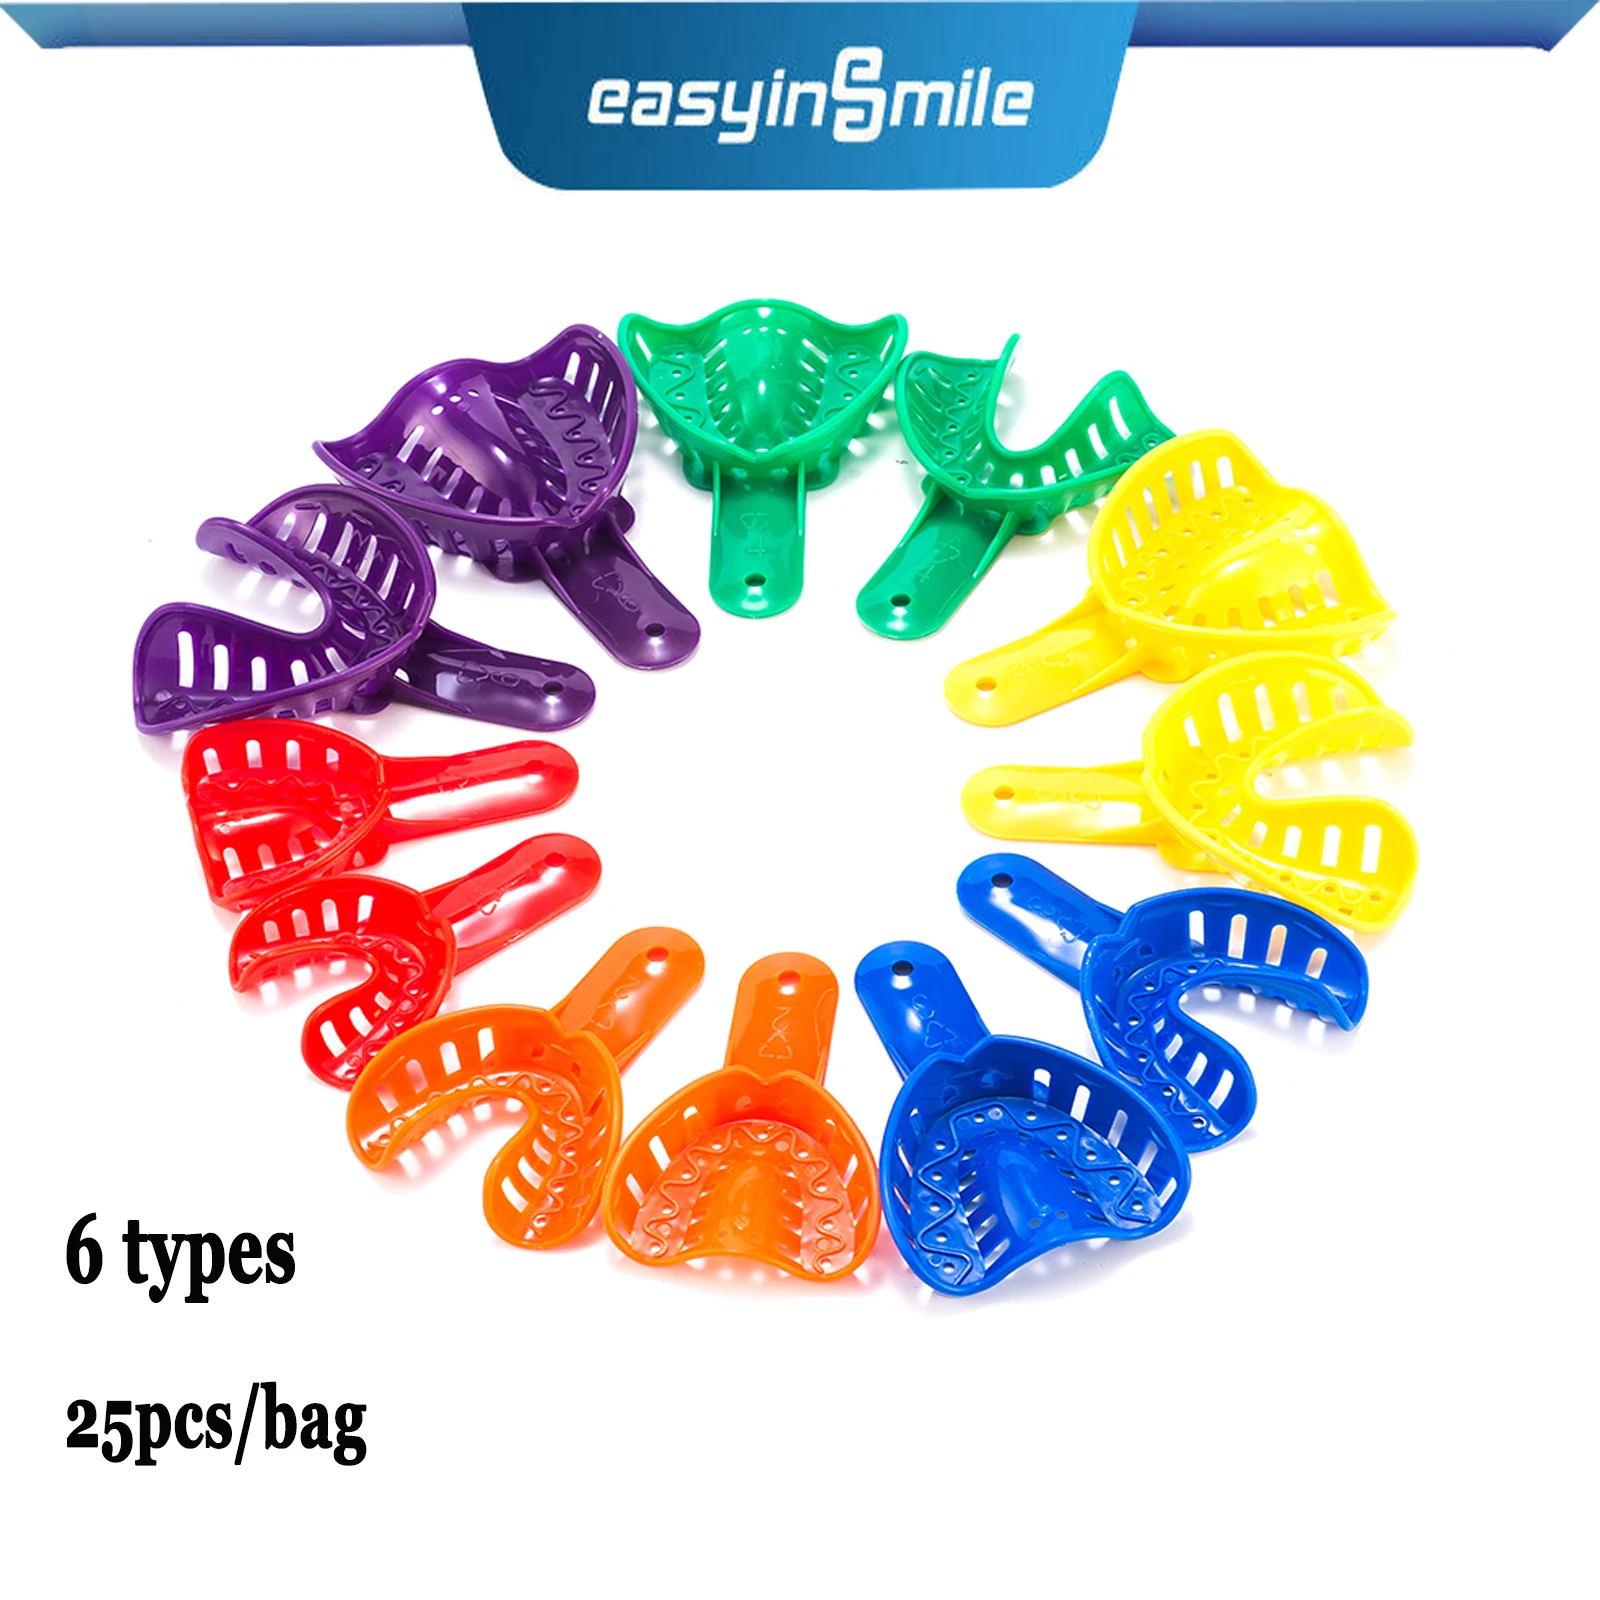 

25pcs/Bag Dental Impression Trays Orthodontic Perforated Plastic Disposable S/M/L for Adult Child